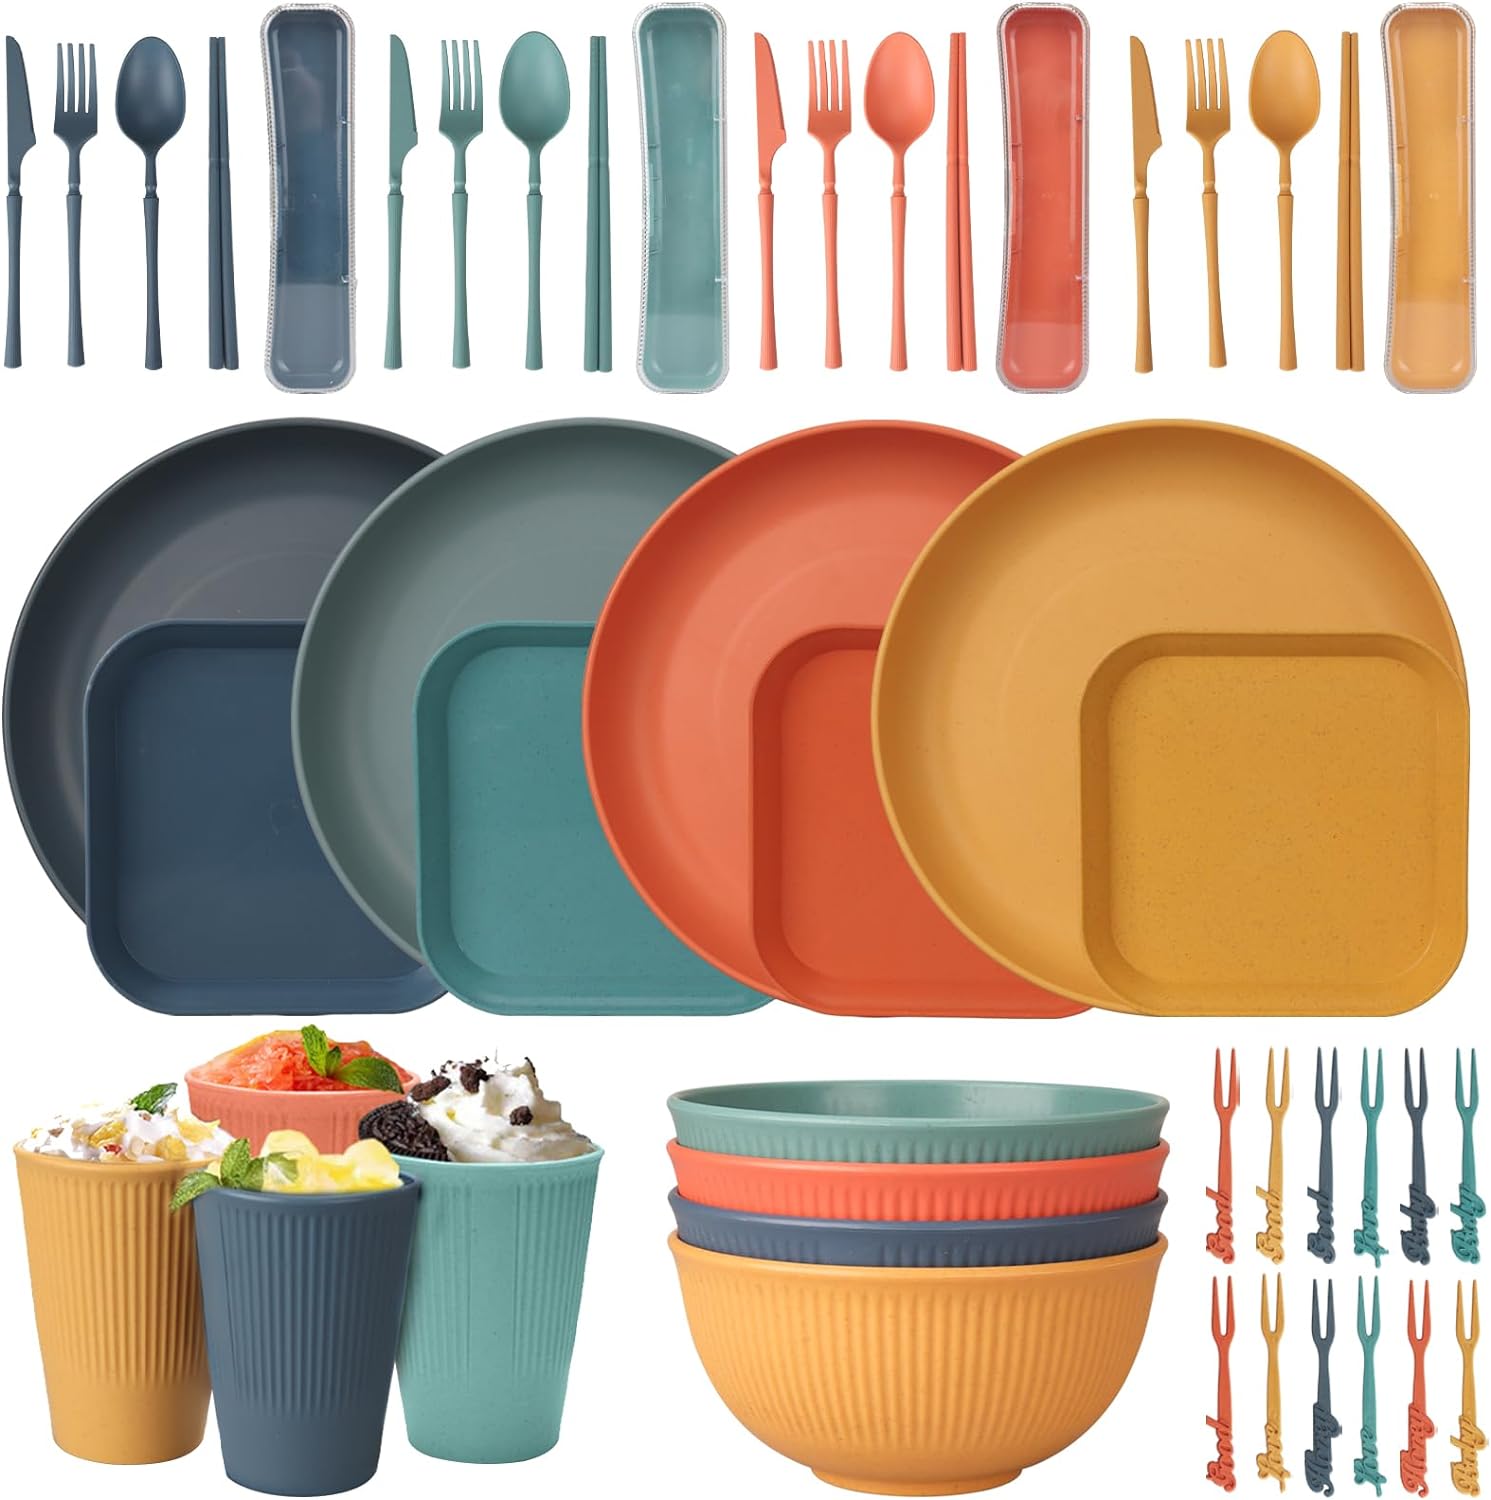 48pcs Unbreakable Dinnerware Sets for 4 People, Camping/Picnic Dinner Sets